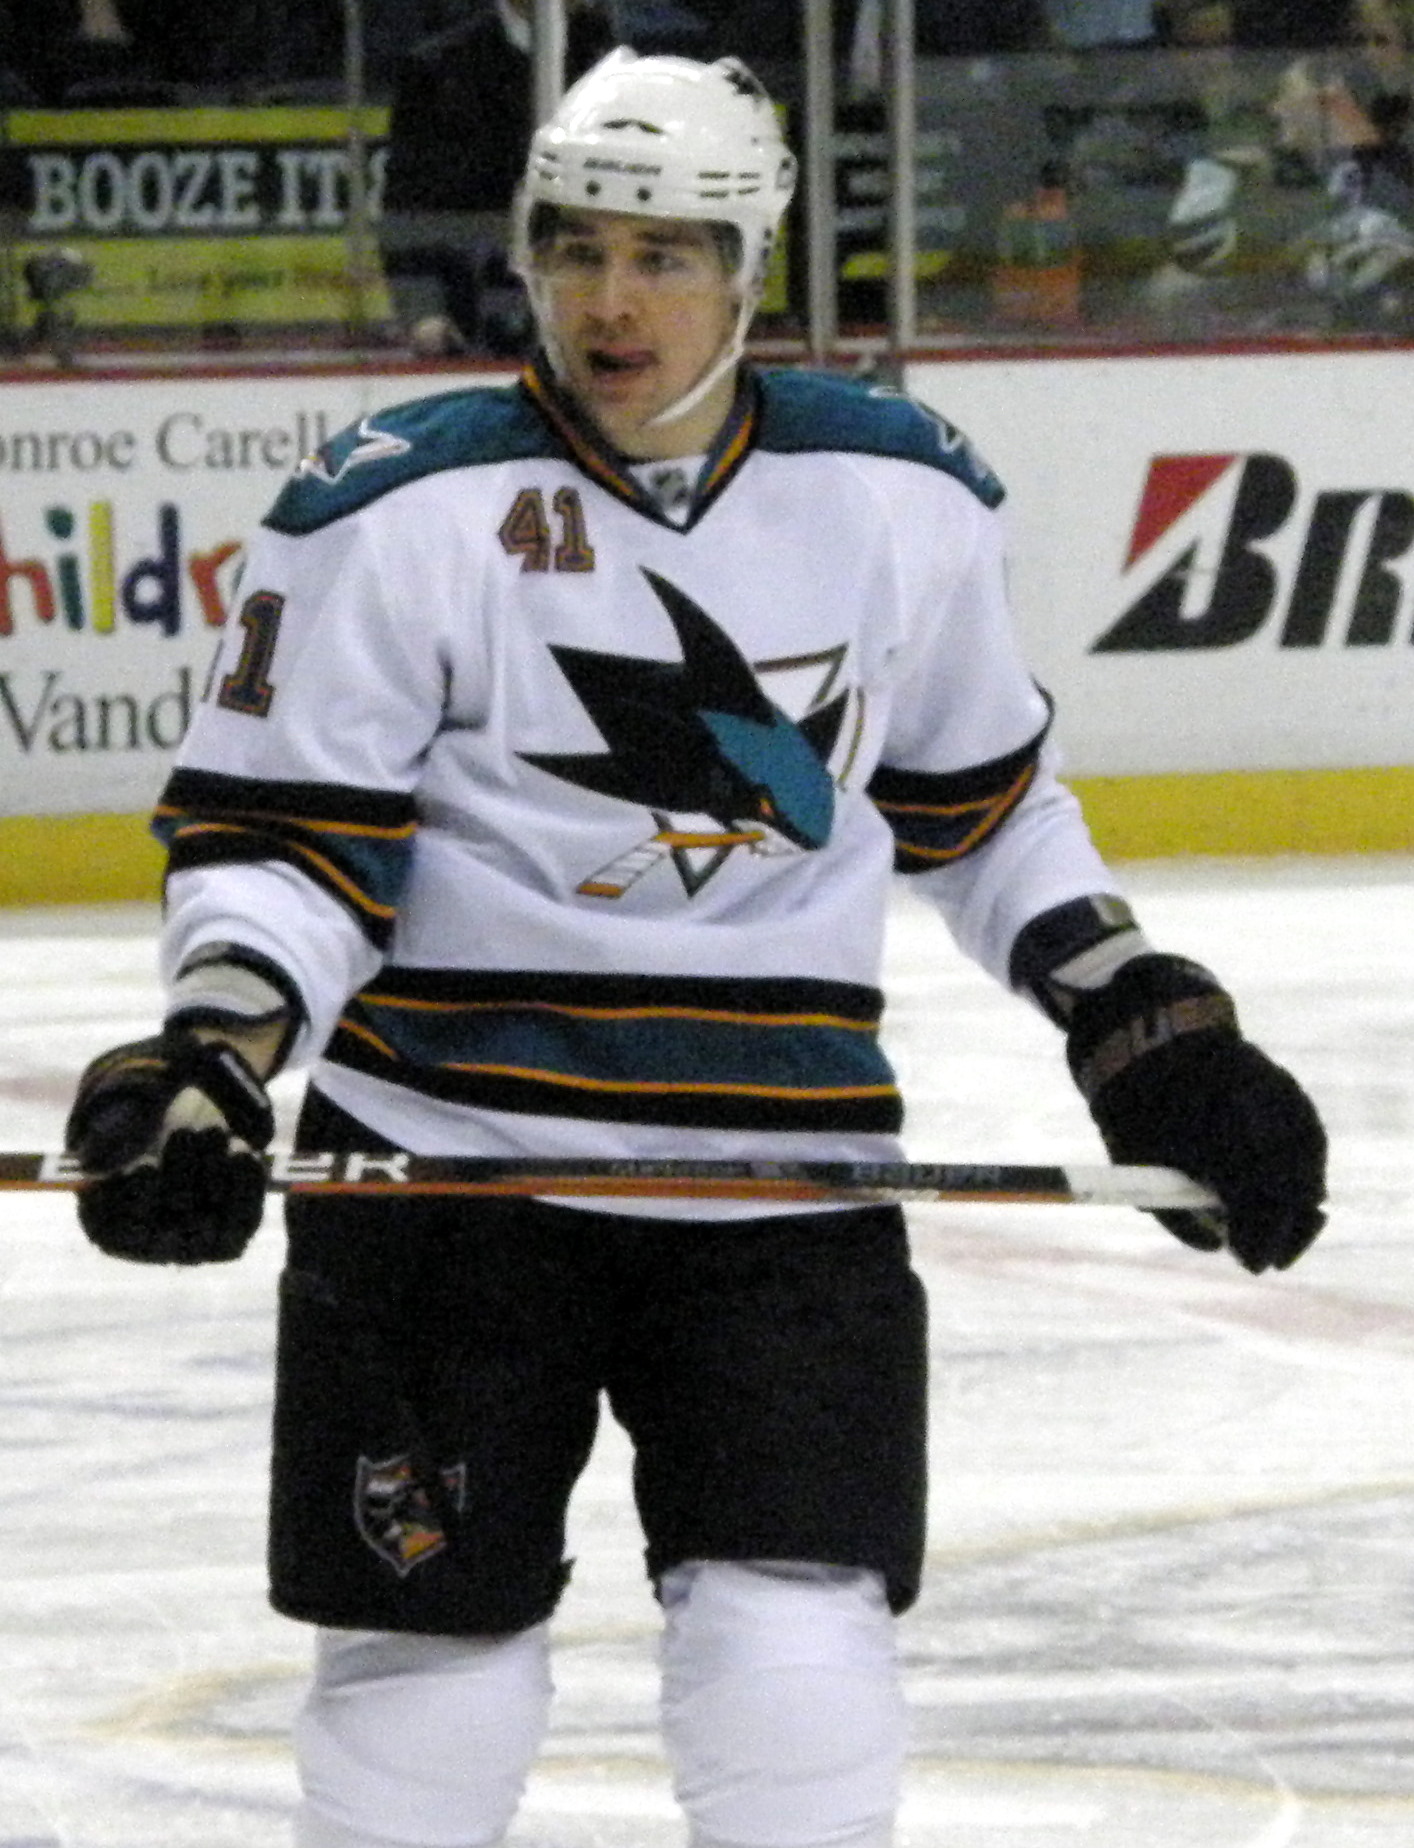 the hockey player in uniform is standing on the ice